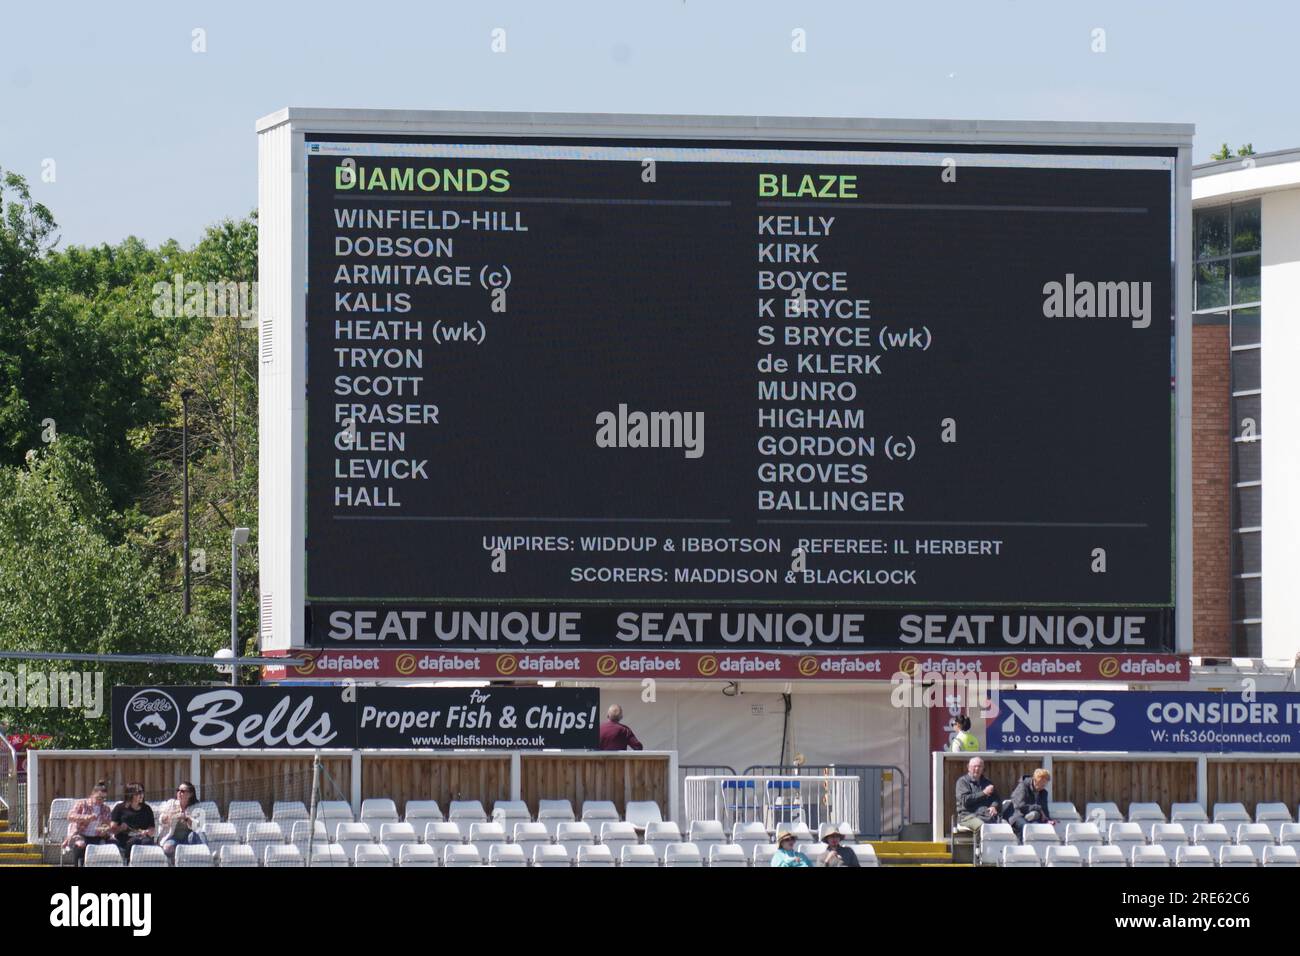 Chester le Street, 2 June 2023. The scoreboard showing the teams before a Charlotte Edwards Cup match between Northern Diamonds and The Blaze at Seat Unique Riverside. Credit: Colin Edwards Stock Photo